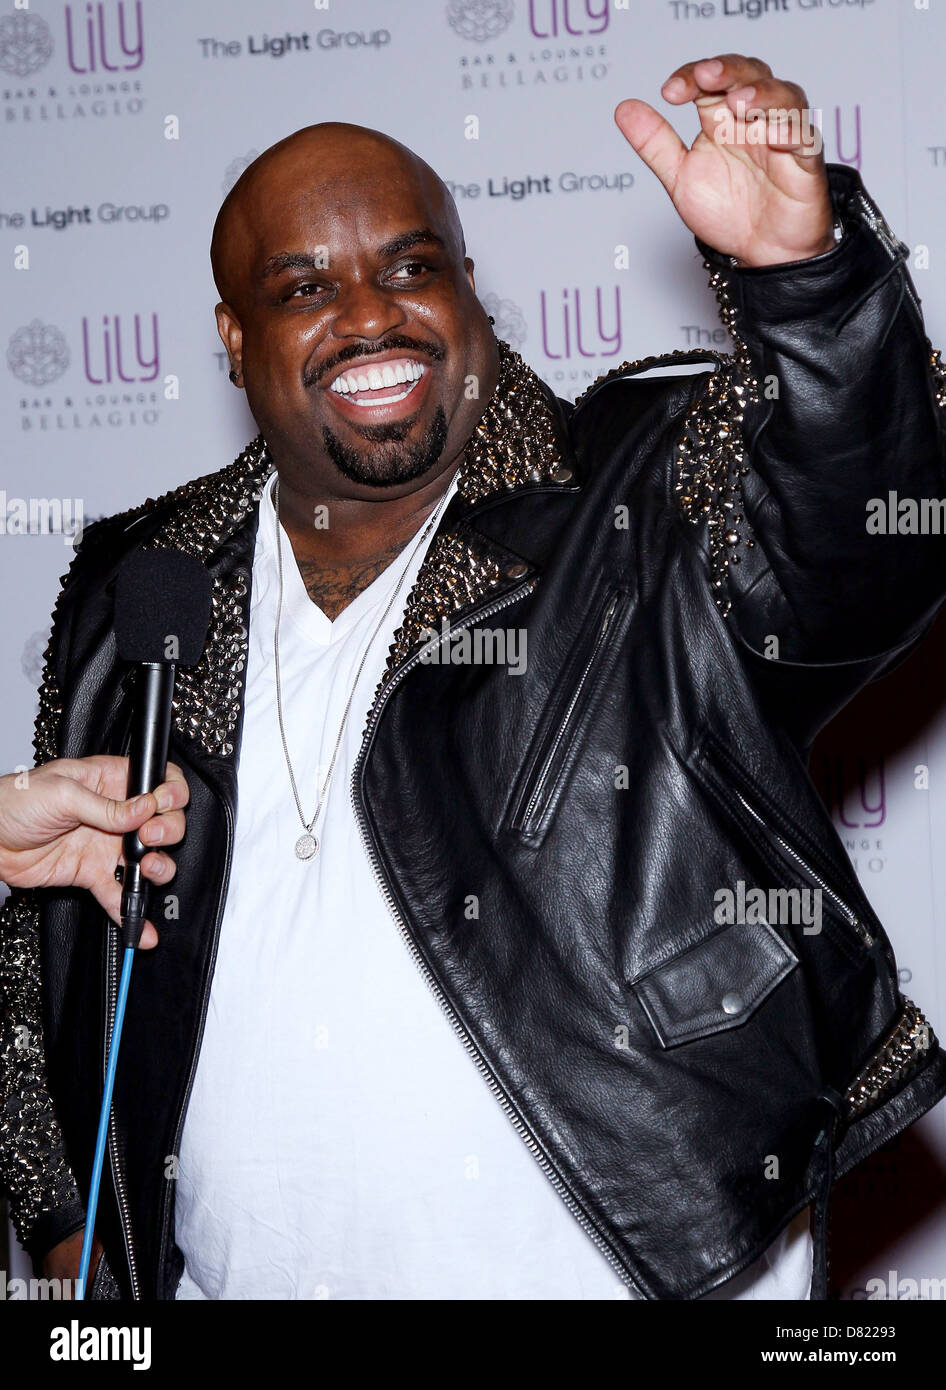 Cee Lo Green The Light Group celebrates grand opening of Lily Bar and Lounge at The Bellagio Resort and Casino Las Vegas, Stock Photo